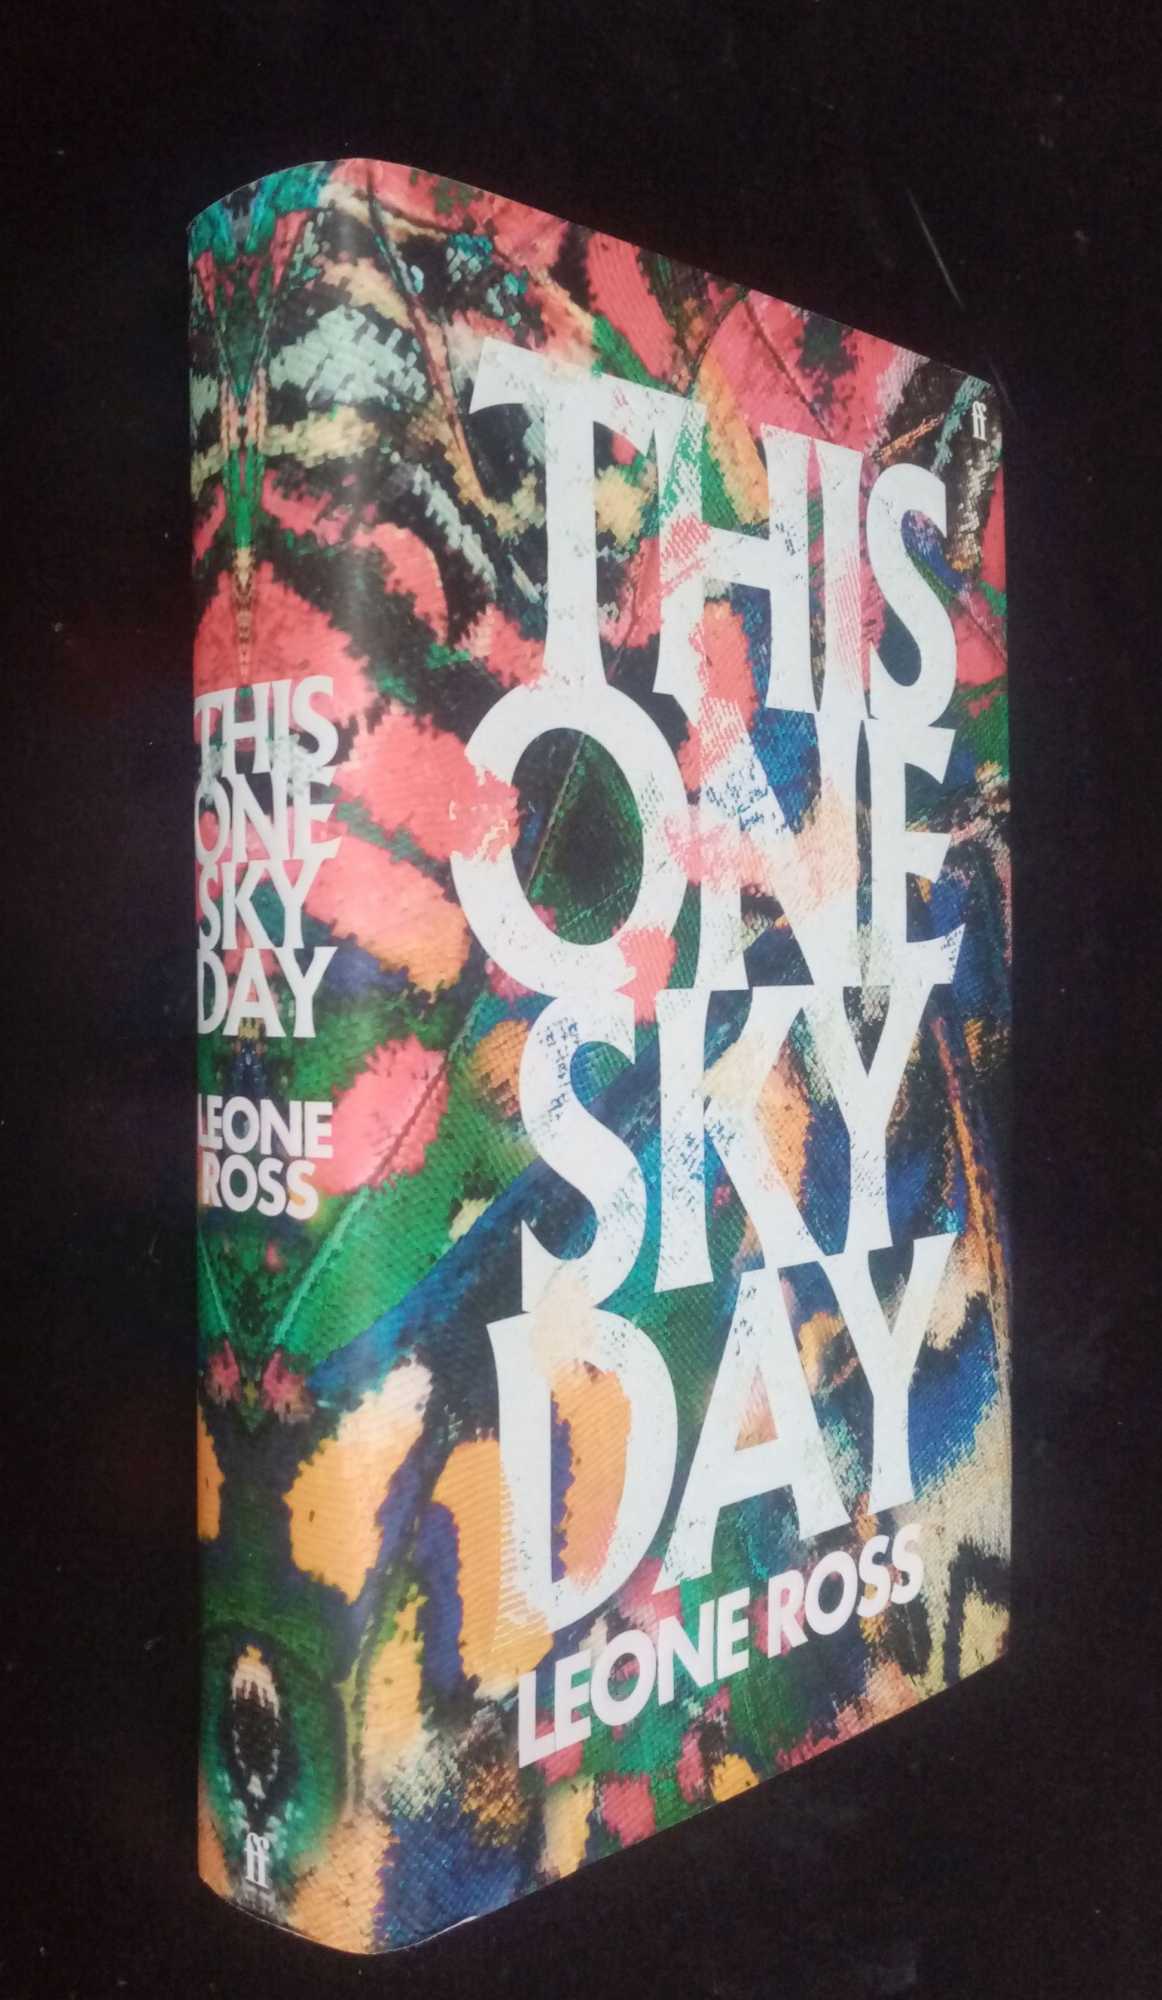 Leone ross - This One Sky Day First Edition. [Colour sprayed fore edges]